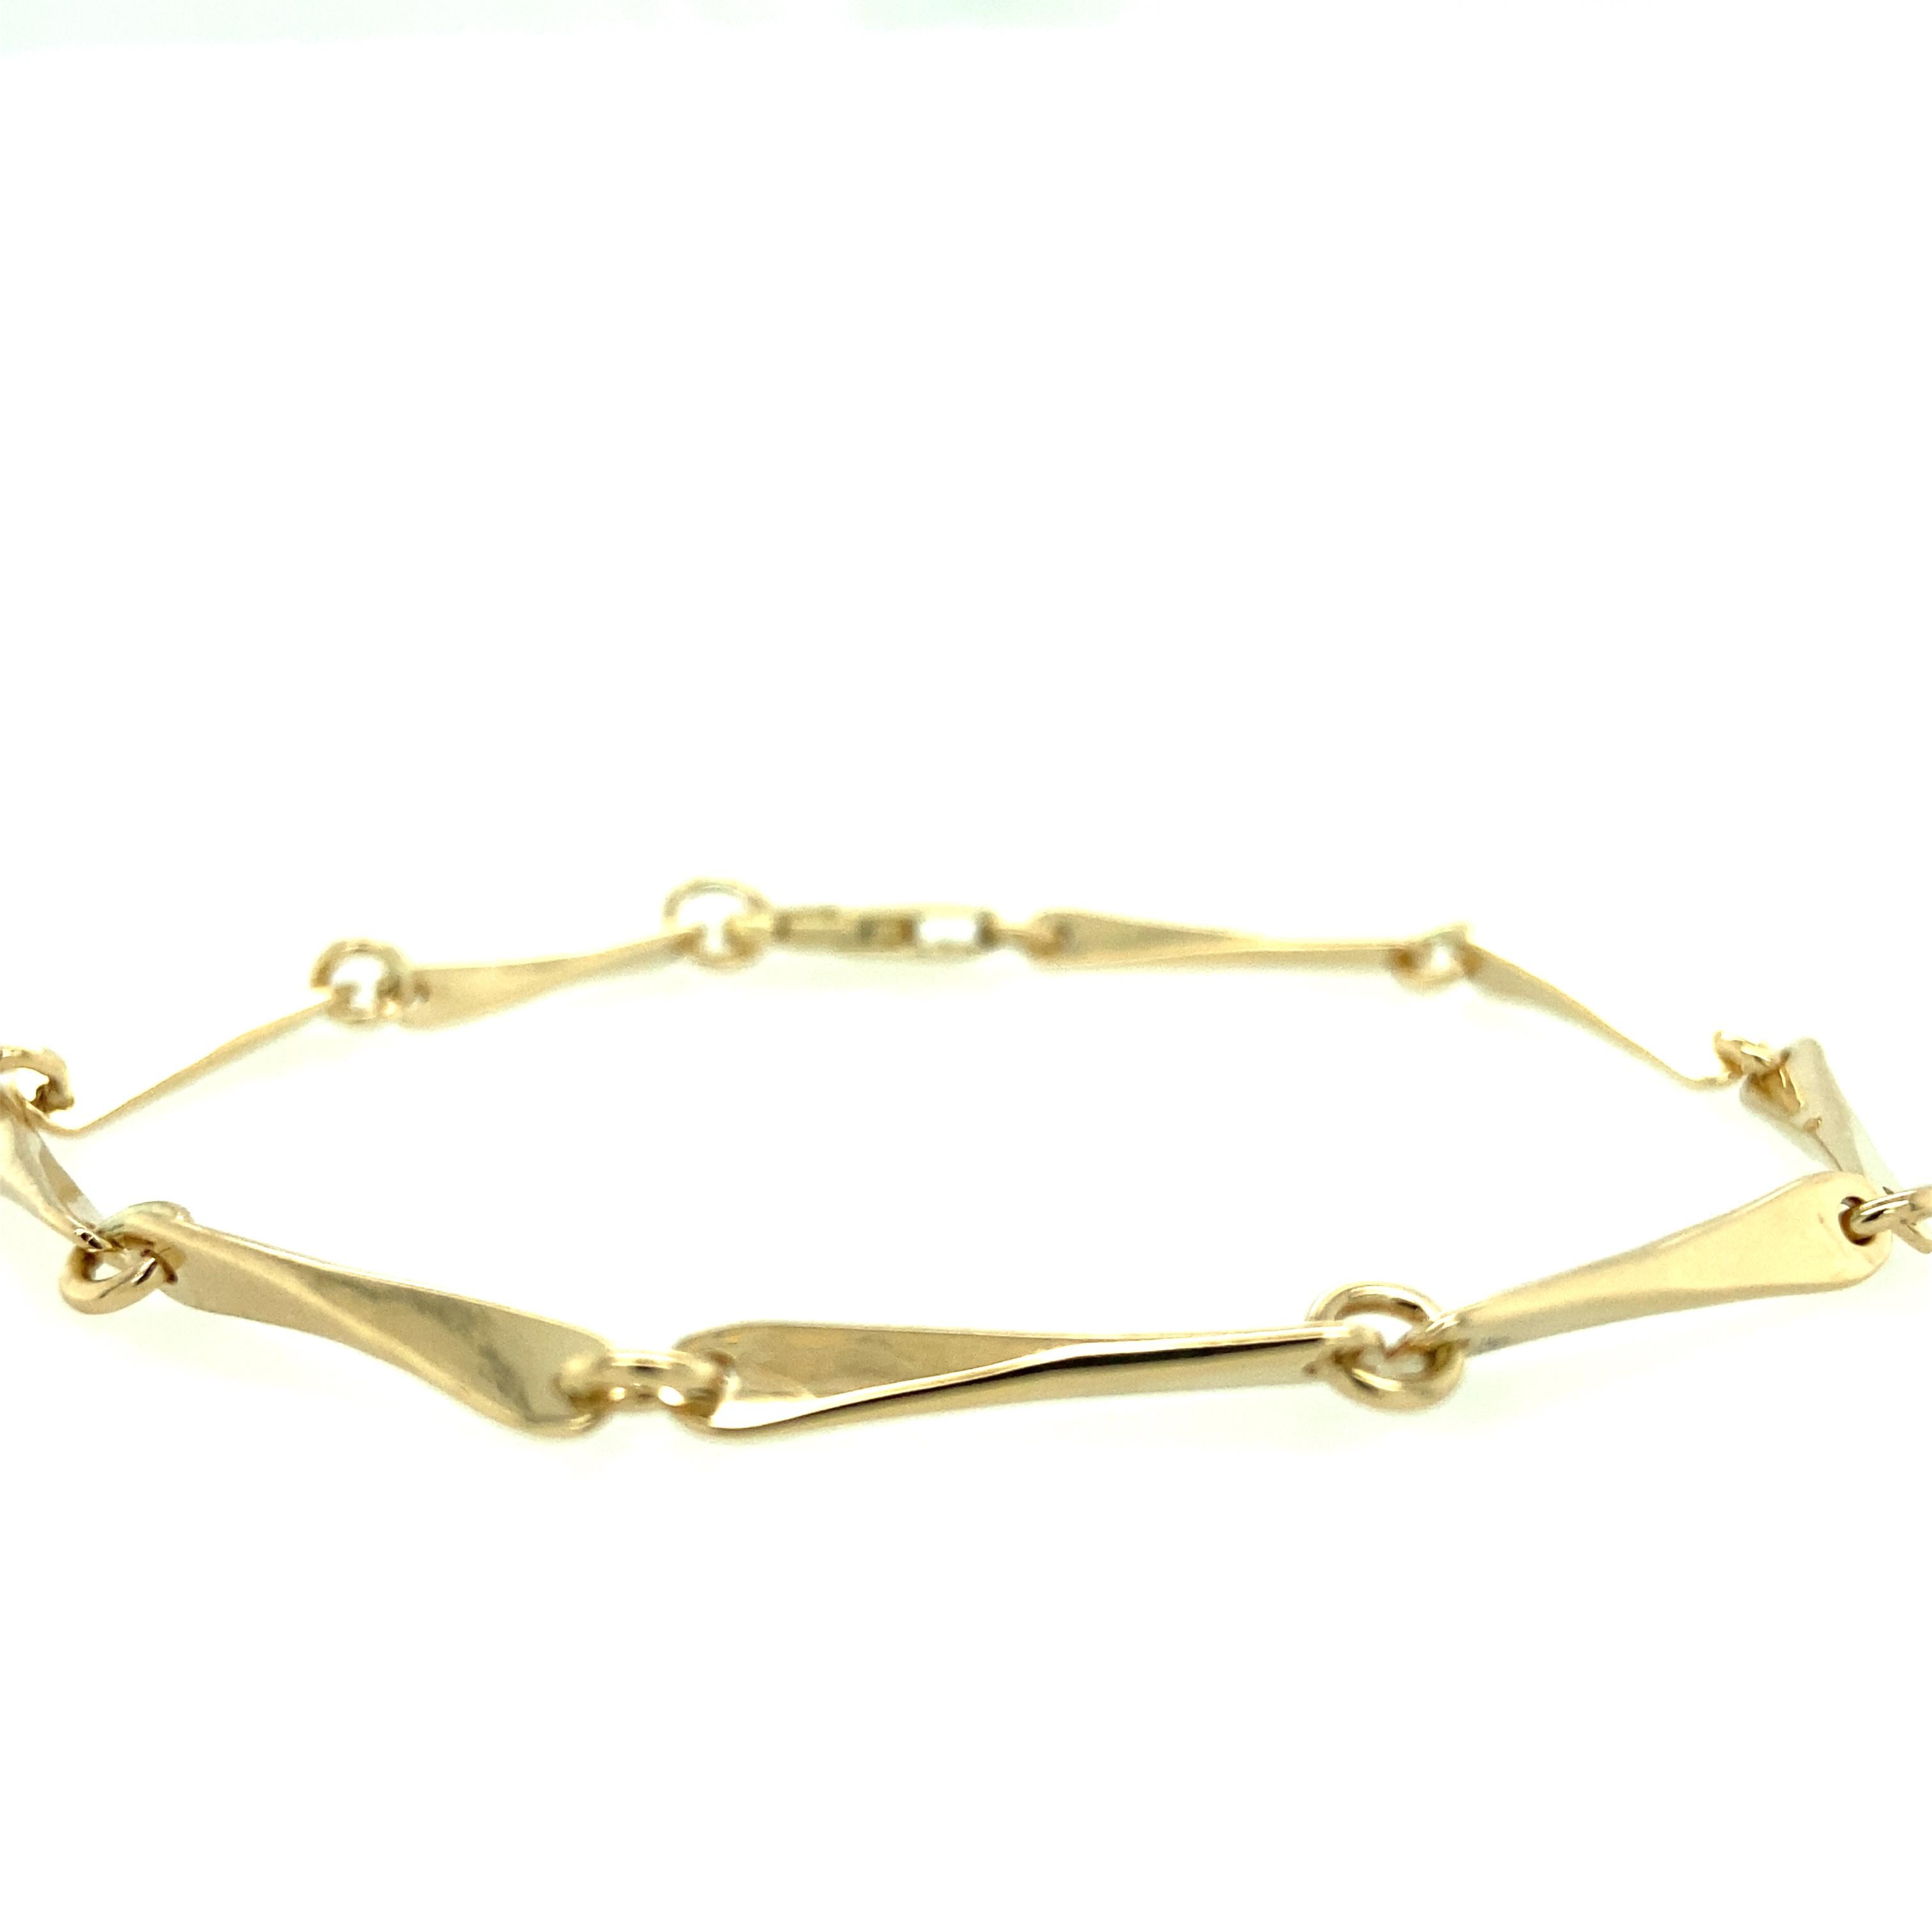 One 14 karat yellow gold (stamped 585) estate bar link bracelet measuring 7 3/4 inches and is complete with a lobster clasp. 